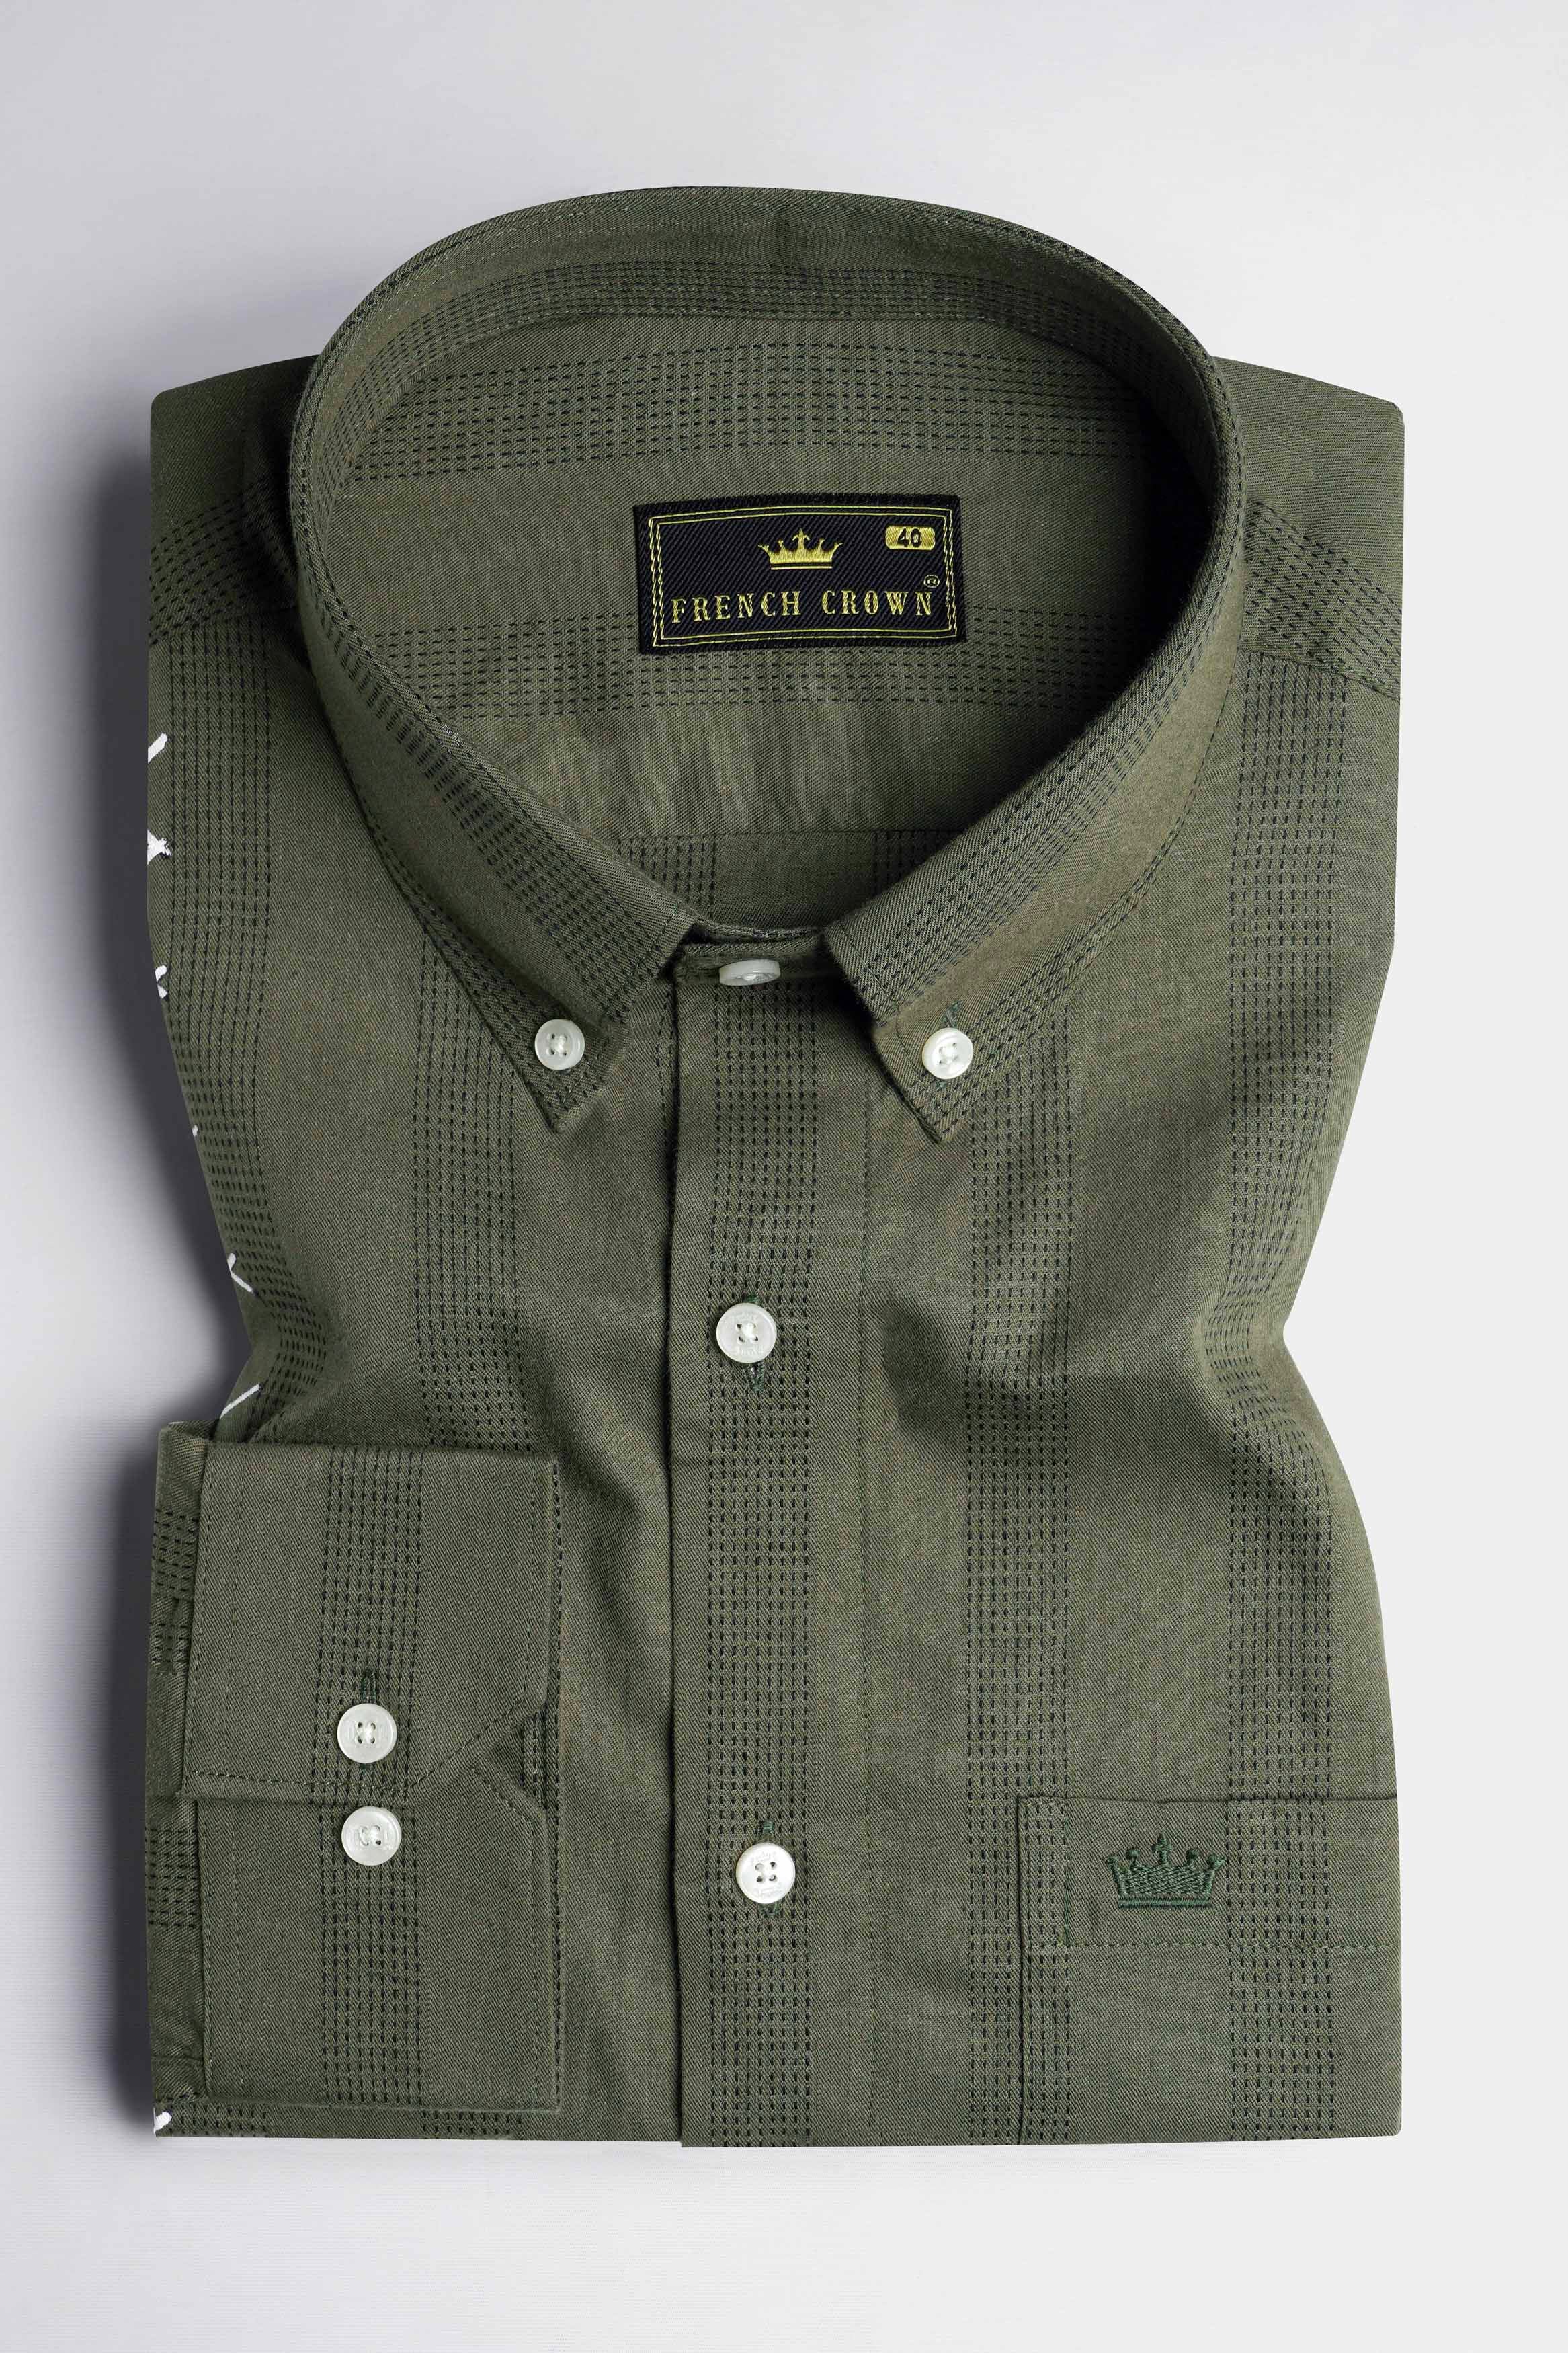 Kelp Green with Black and White Hand Painted Twill Premium Cotton Desiger Shirt 7570-BD-ART-38, 7570-BD-ART-H-38, 7570-BD-ART-39, 7570-BD-ART-H-39, 7570-BD-ART-40, 7570-BD-ART-H-40, 7570-BD-ART-42, 7570-BD-ART-H-42, 7570-BD-ART-44, 7570-BD-ART-H-44, 7570-BD-ART-46, 7570-BD-ART-H-46, 7570-BD-ART-48, 7570-BD-ART-H-48, 7570-BD-ART-50, 7570-BD-ART-H-50, 7570-BD-ART-52, 7570-BD-ART-H-52